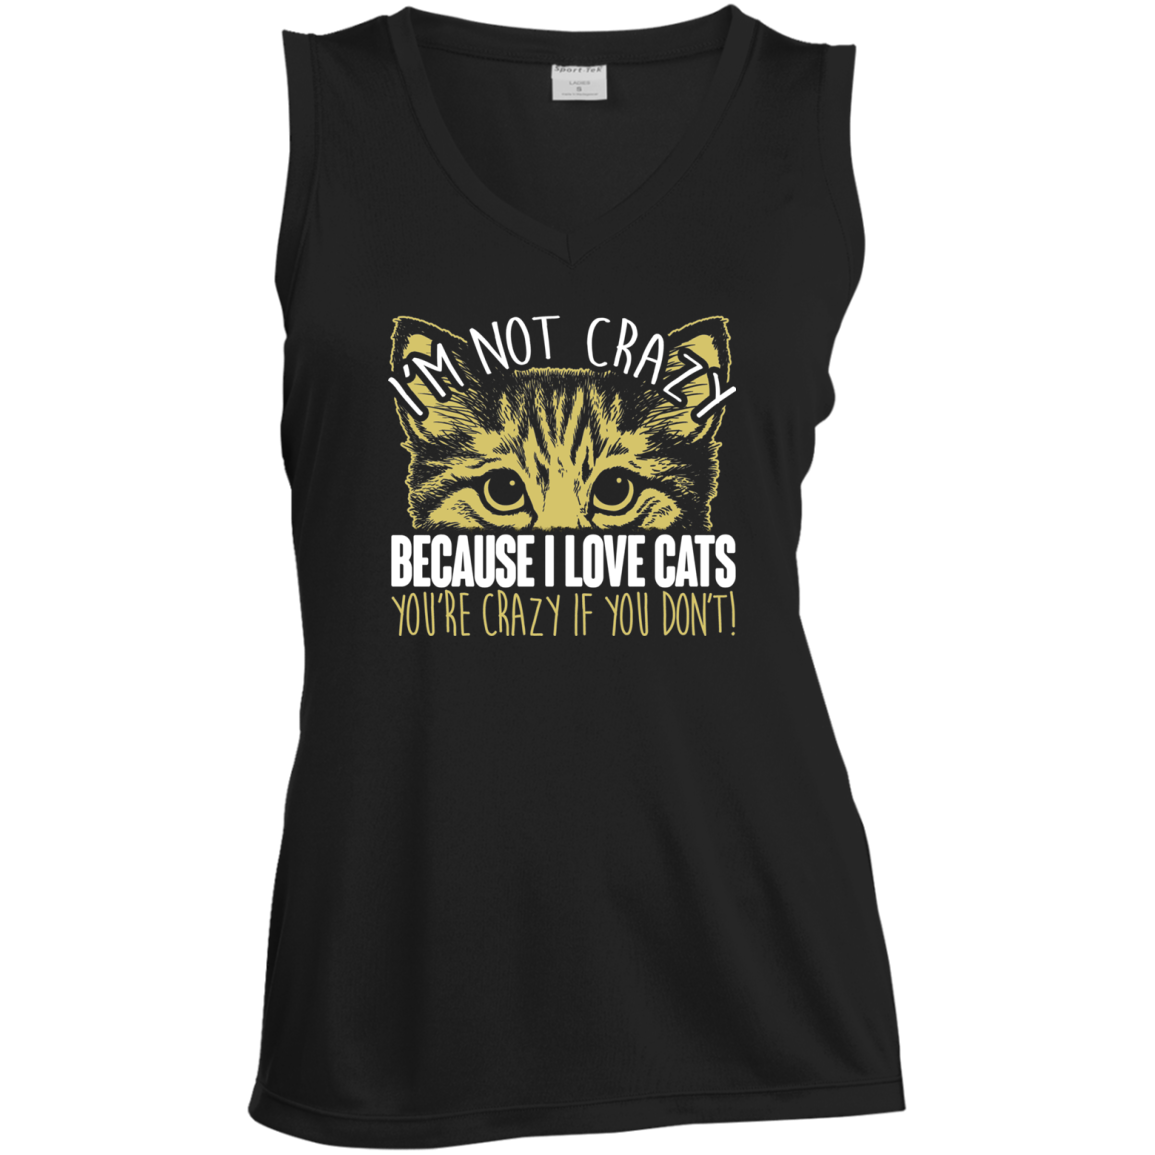 I'm Not Crazy Because I Love Cats Ladies Sleeveless Moisture Absorbing V-Neck